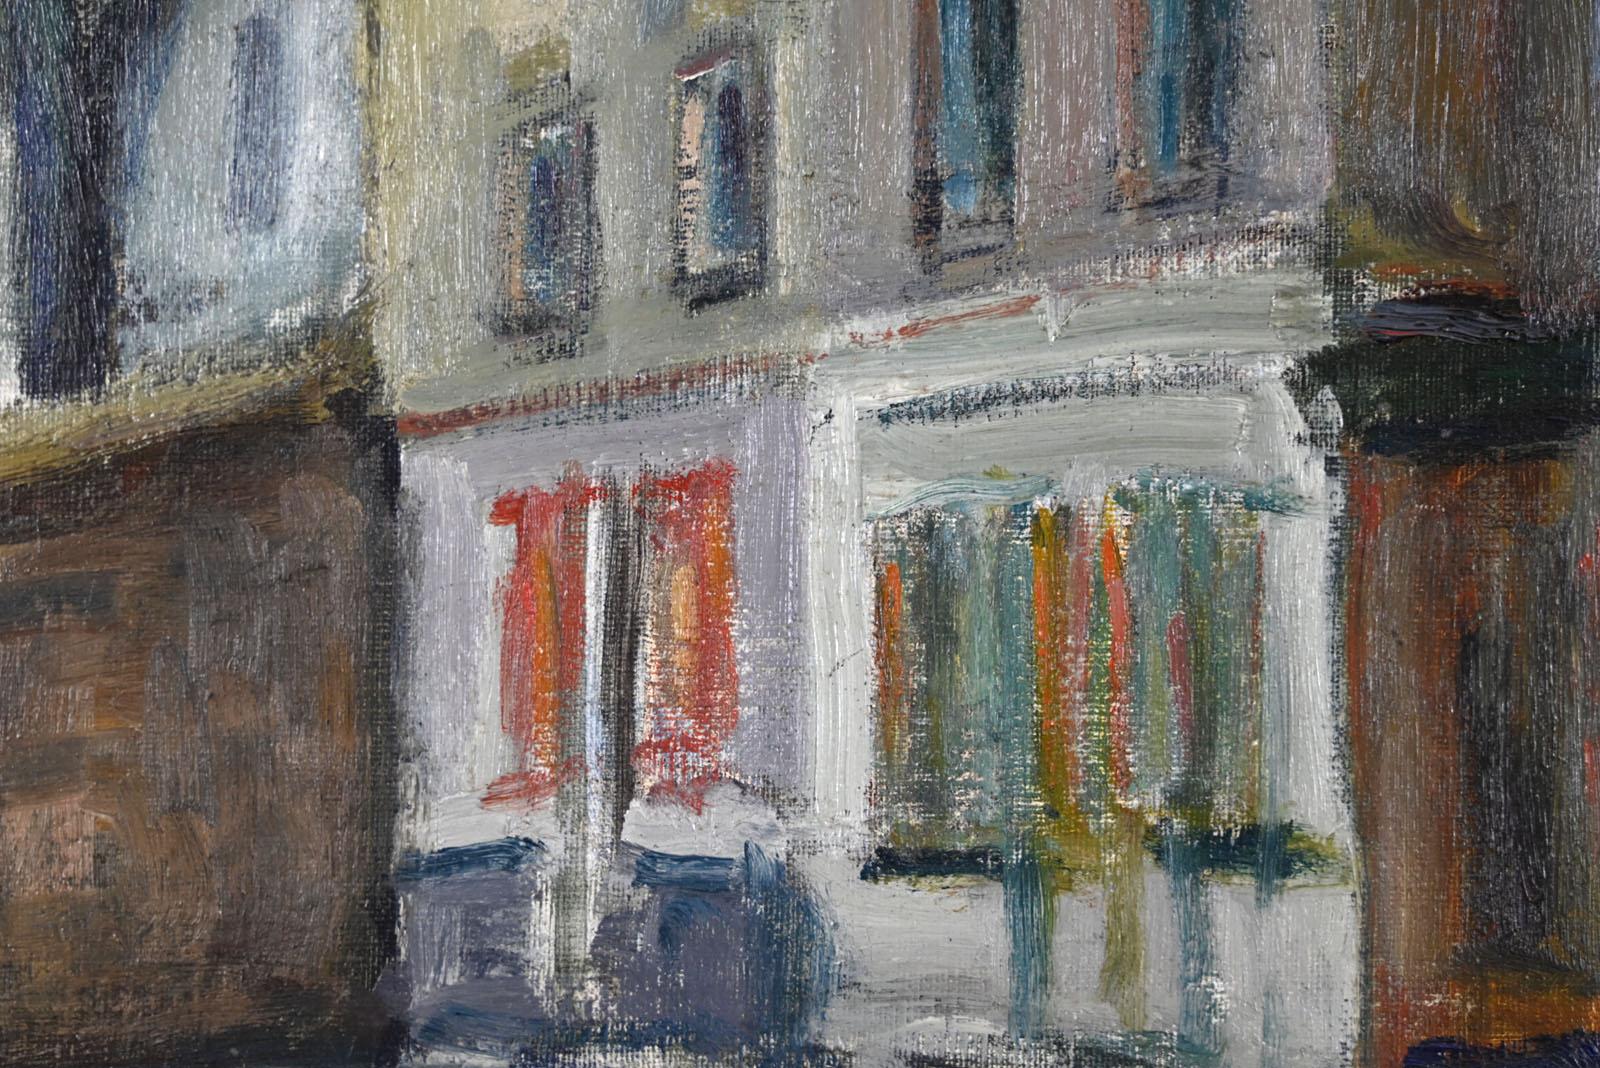 Lyne SEYBEL (1919-2009)
Vieux Montmartre

Oil on canvas
Size: 61 x 50 cm
Signed lower left
In perfect state of conservation.
Without frame

Provenance: Family of the artist

Painting sold with invoice and certificate of authenticity.
Fast and